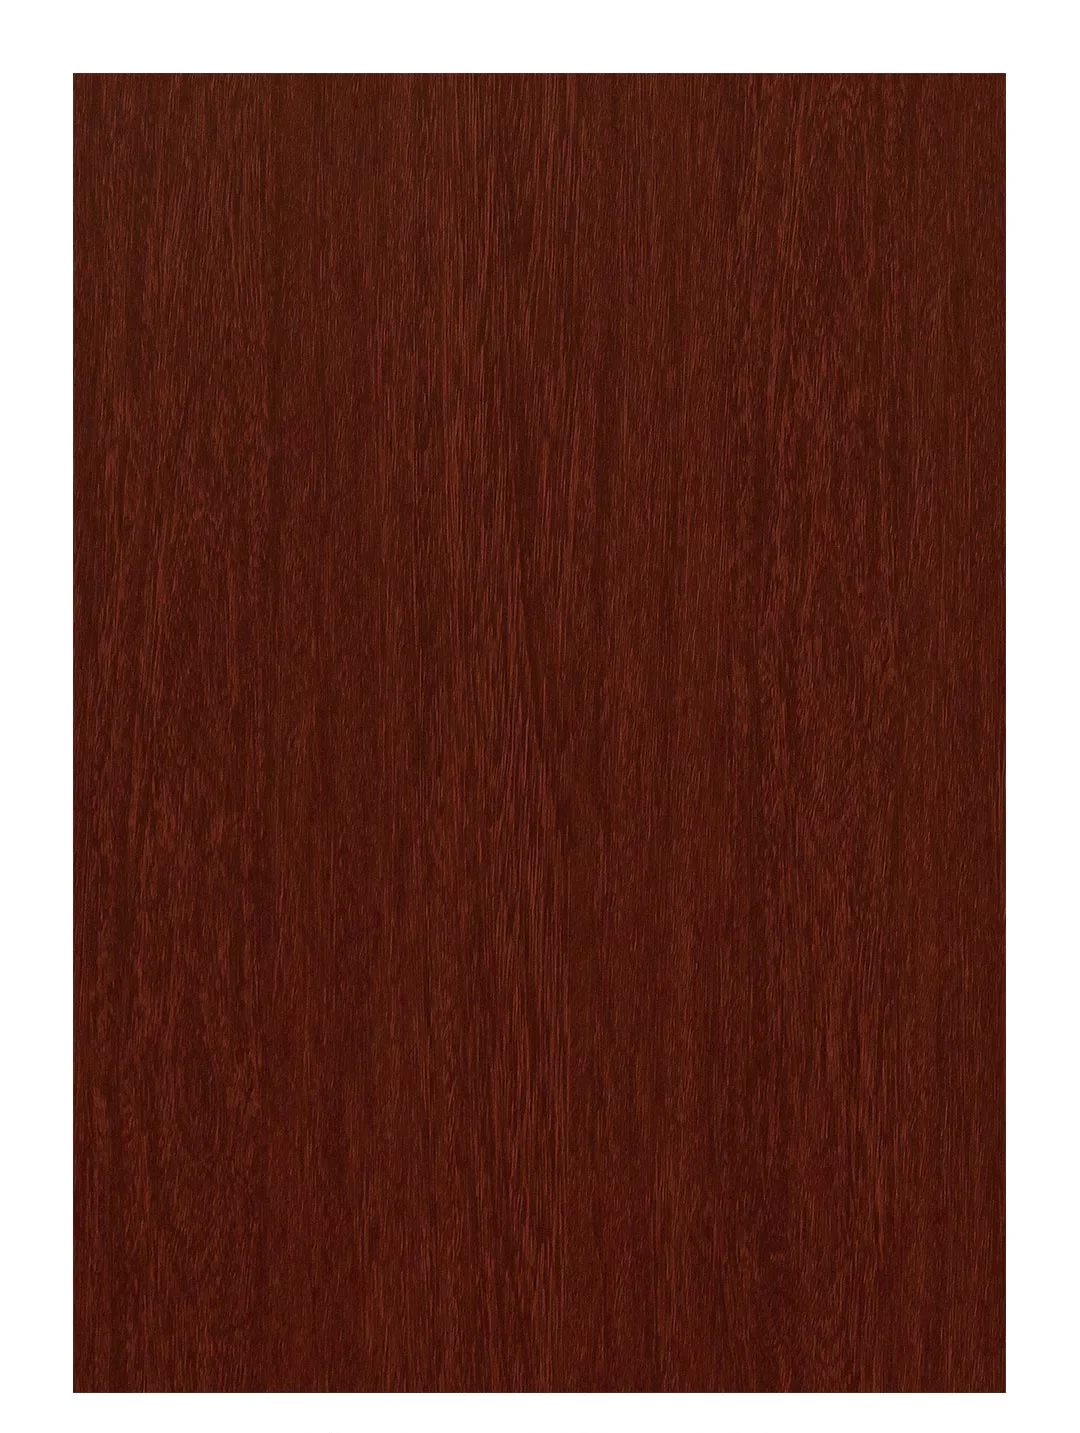 Alutech - Natural Wood | NW-201 - ROSE WOOD